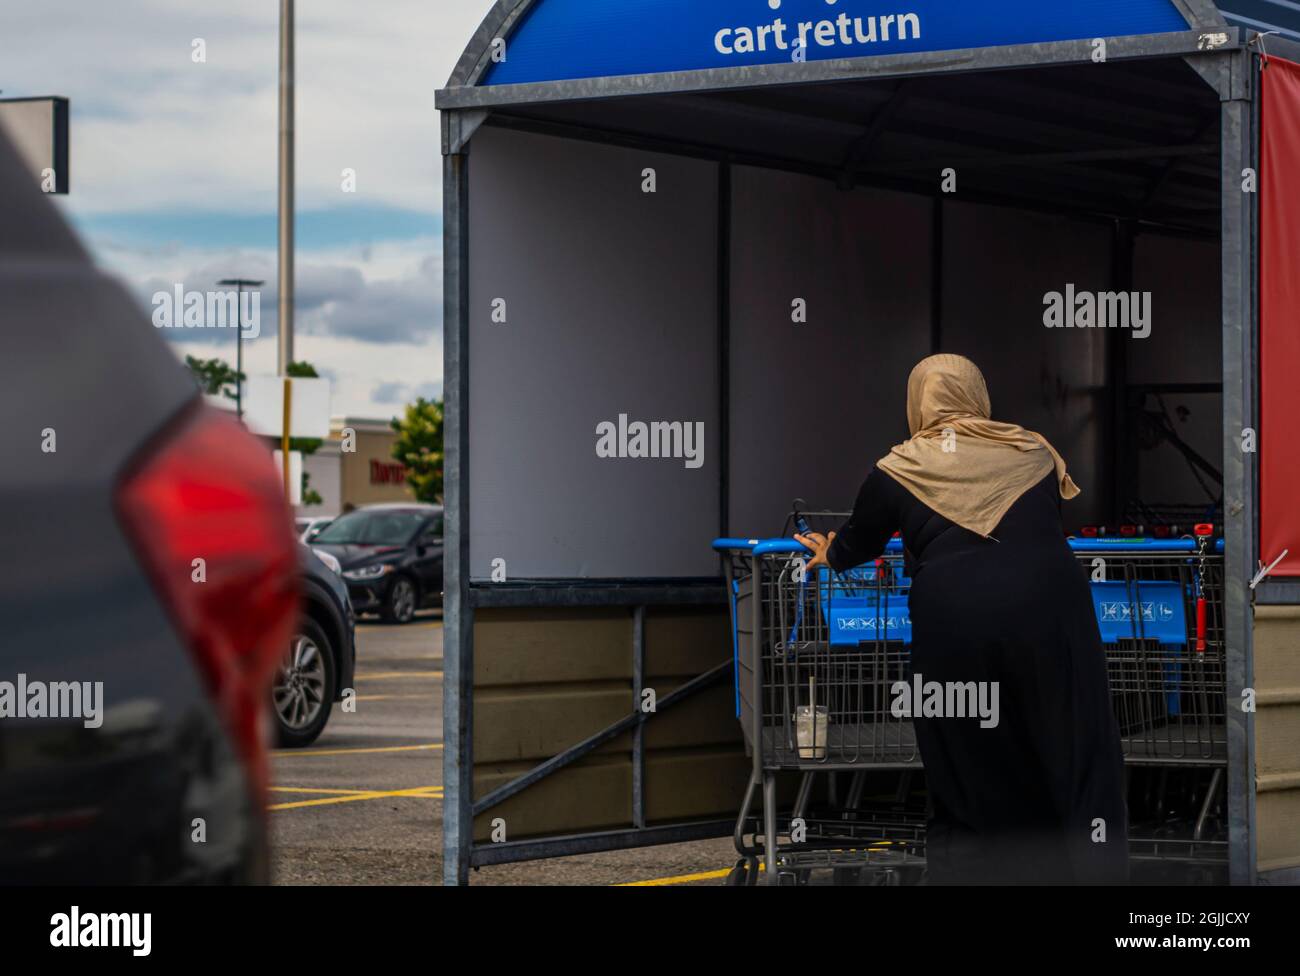 Toronto, Canada, June 2021 - Woman of islamic faith wearing headscarf returns a shopping cart to the bay in the parking lot Walmart Stock Photo